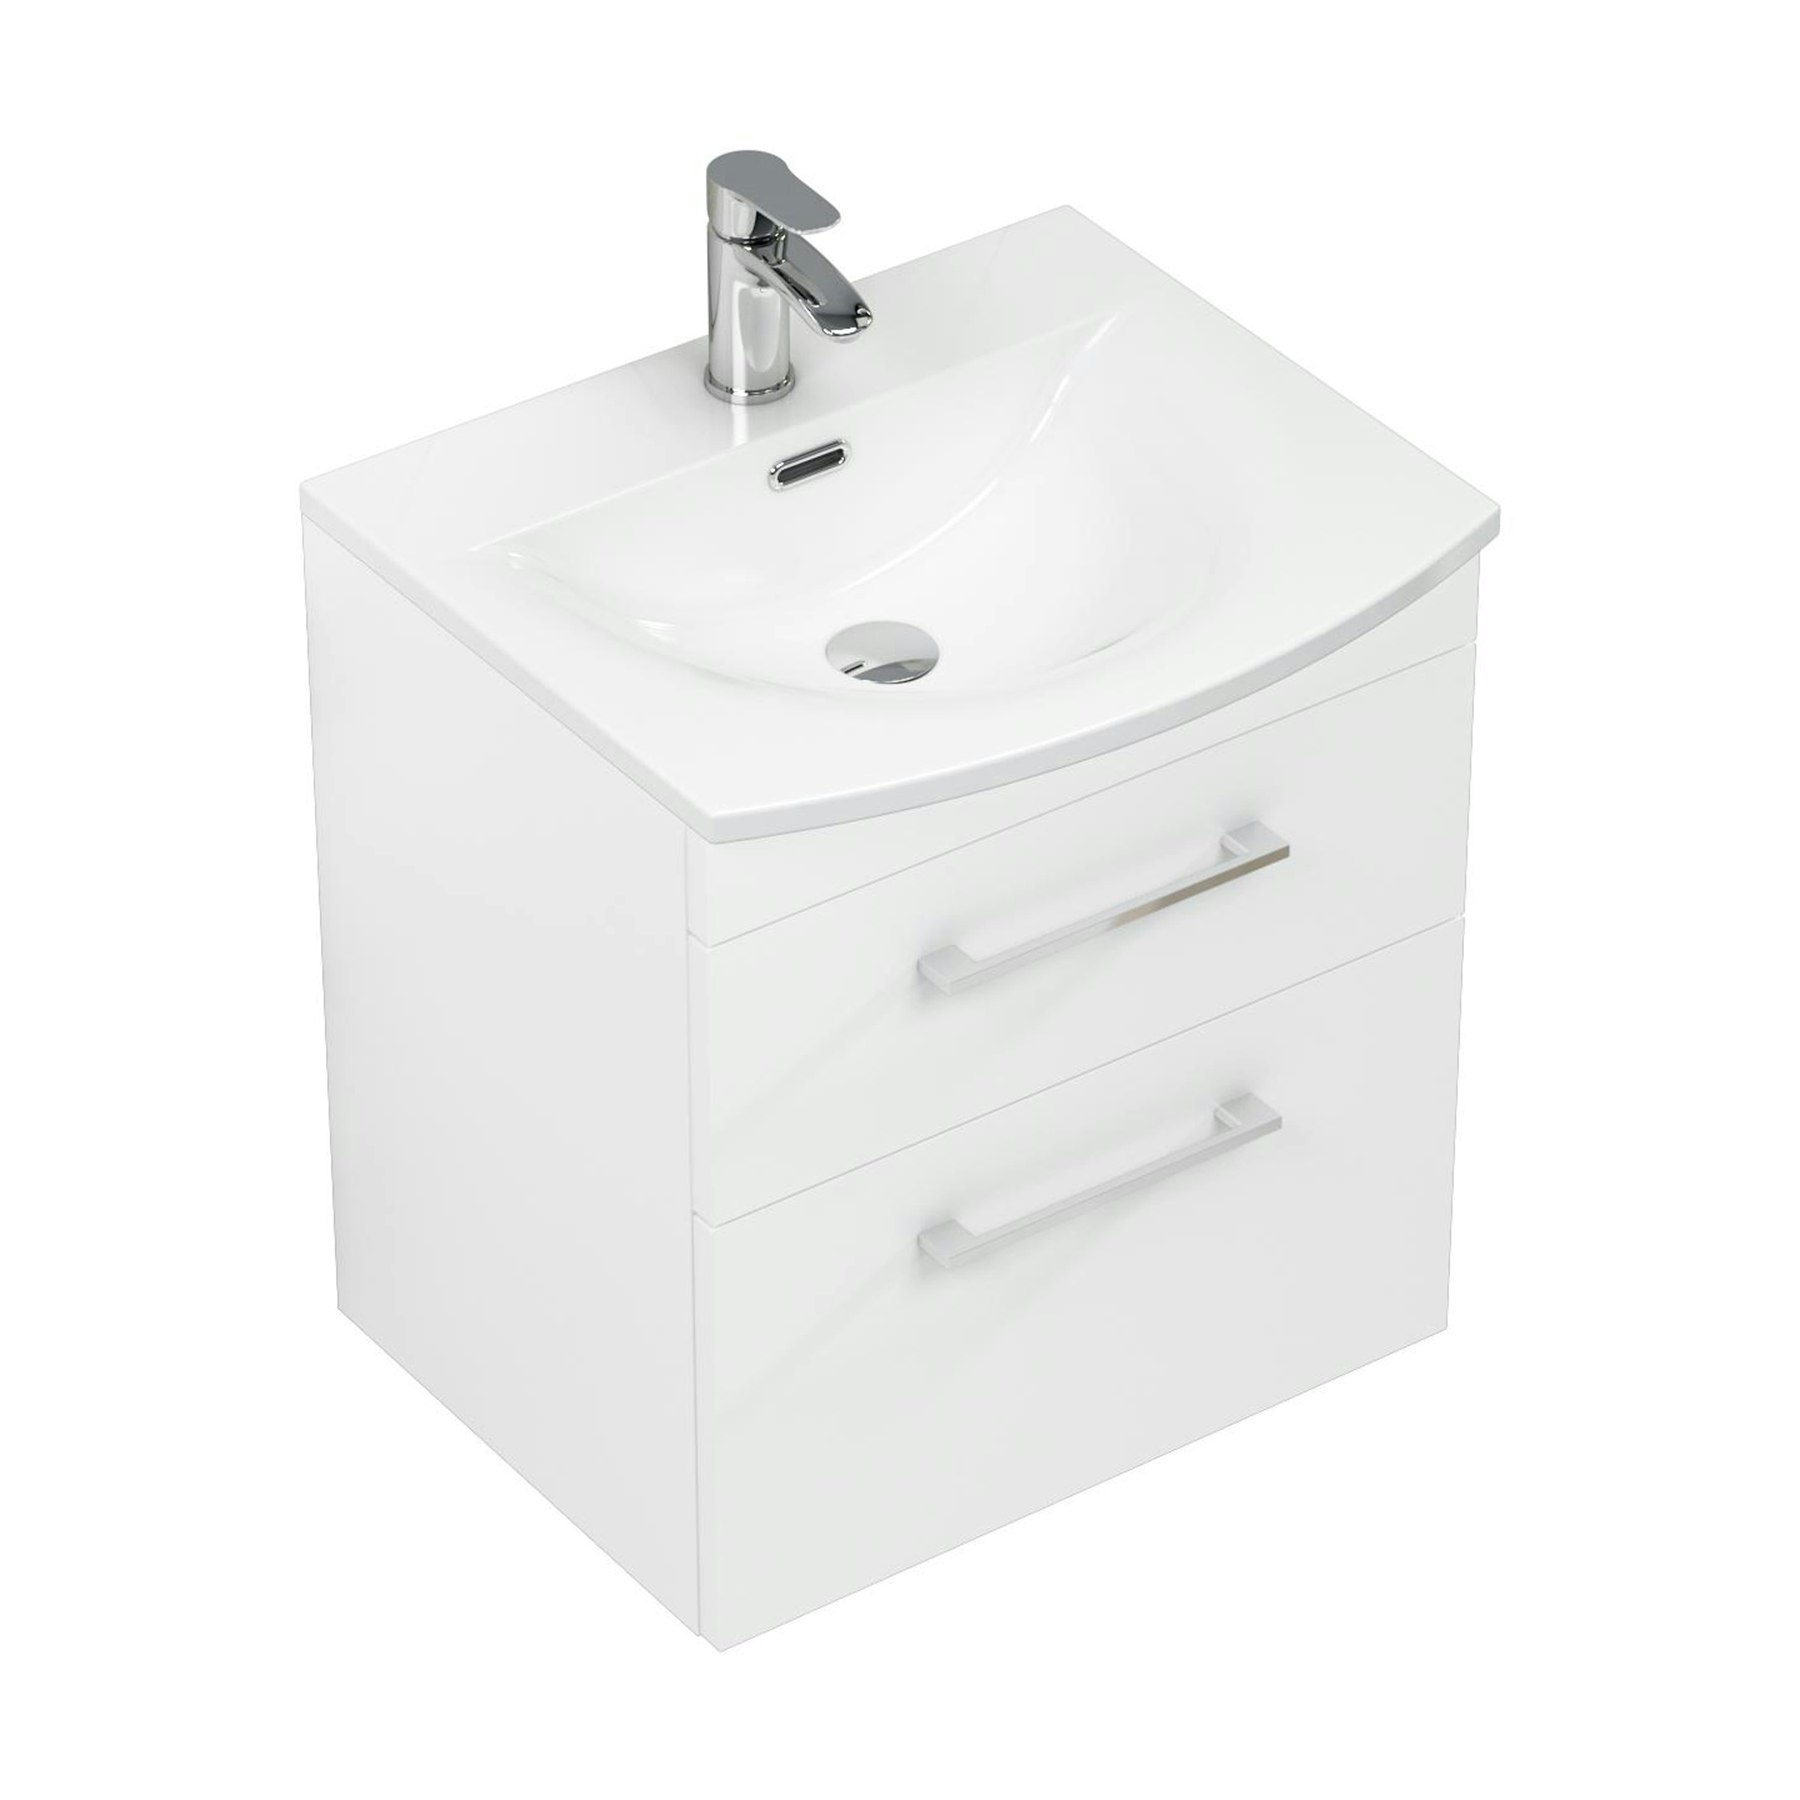  Marbella Gloss White 2 Drawer Wall Hung Vanity Unit with Curved Basin - Multiple Sizes & Handles